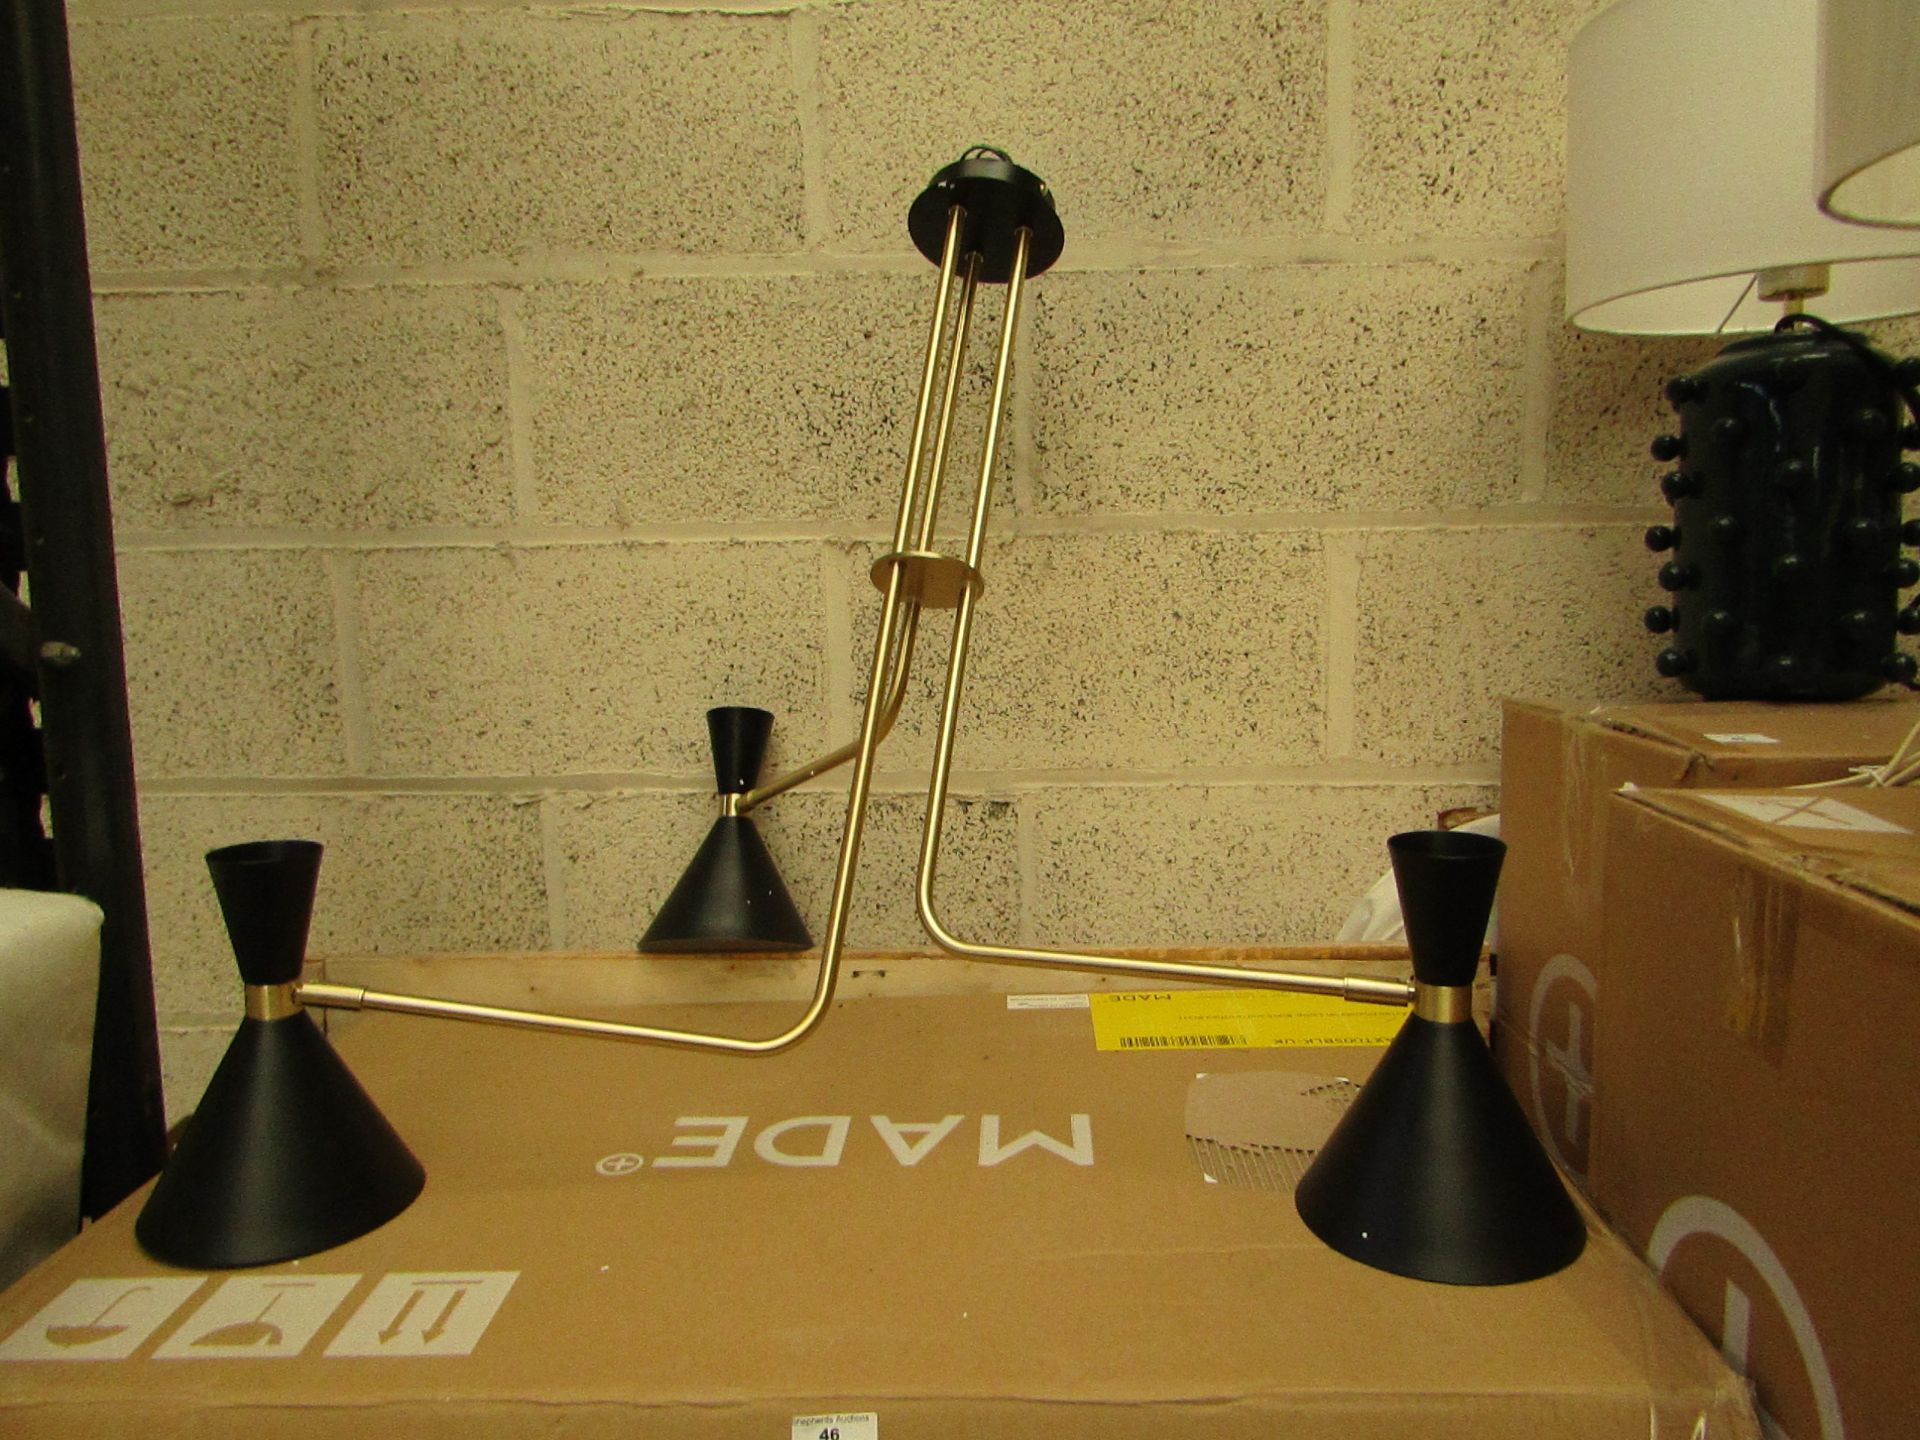 | 1x | MADE.COM AXTON CHANDELIER LAMP BLACK & BRUSHED BRASS CEILING LIGHT | UNCHECKED AND BOXED |